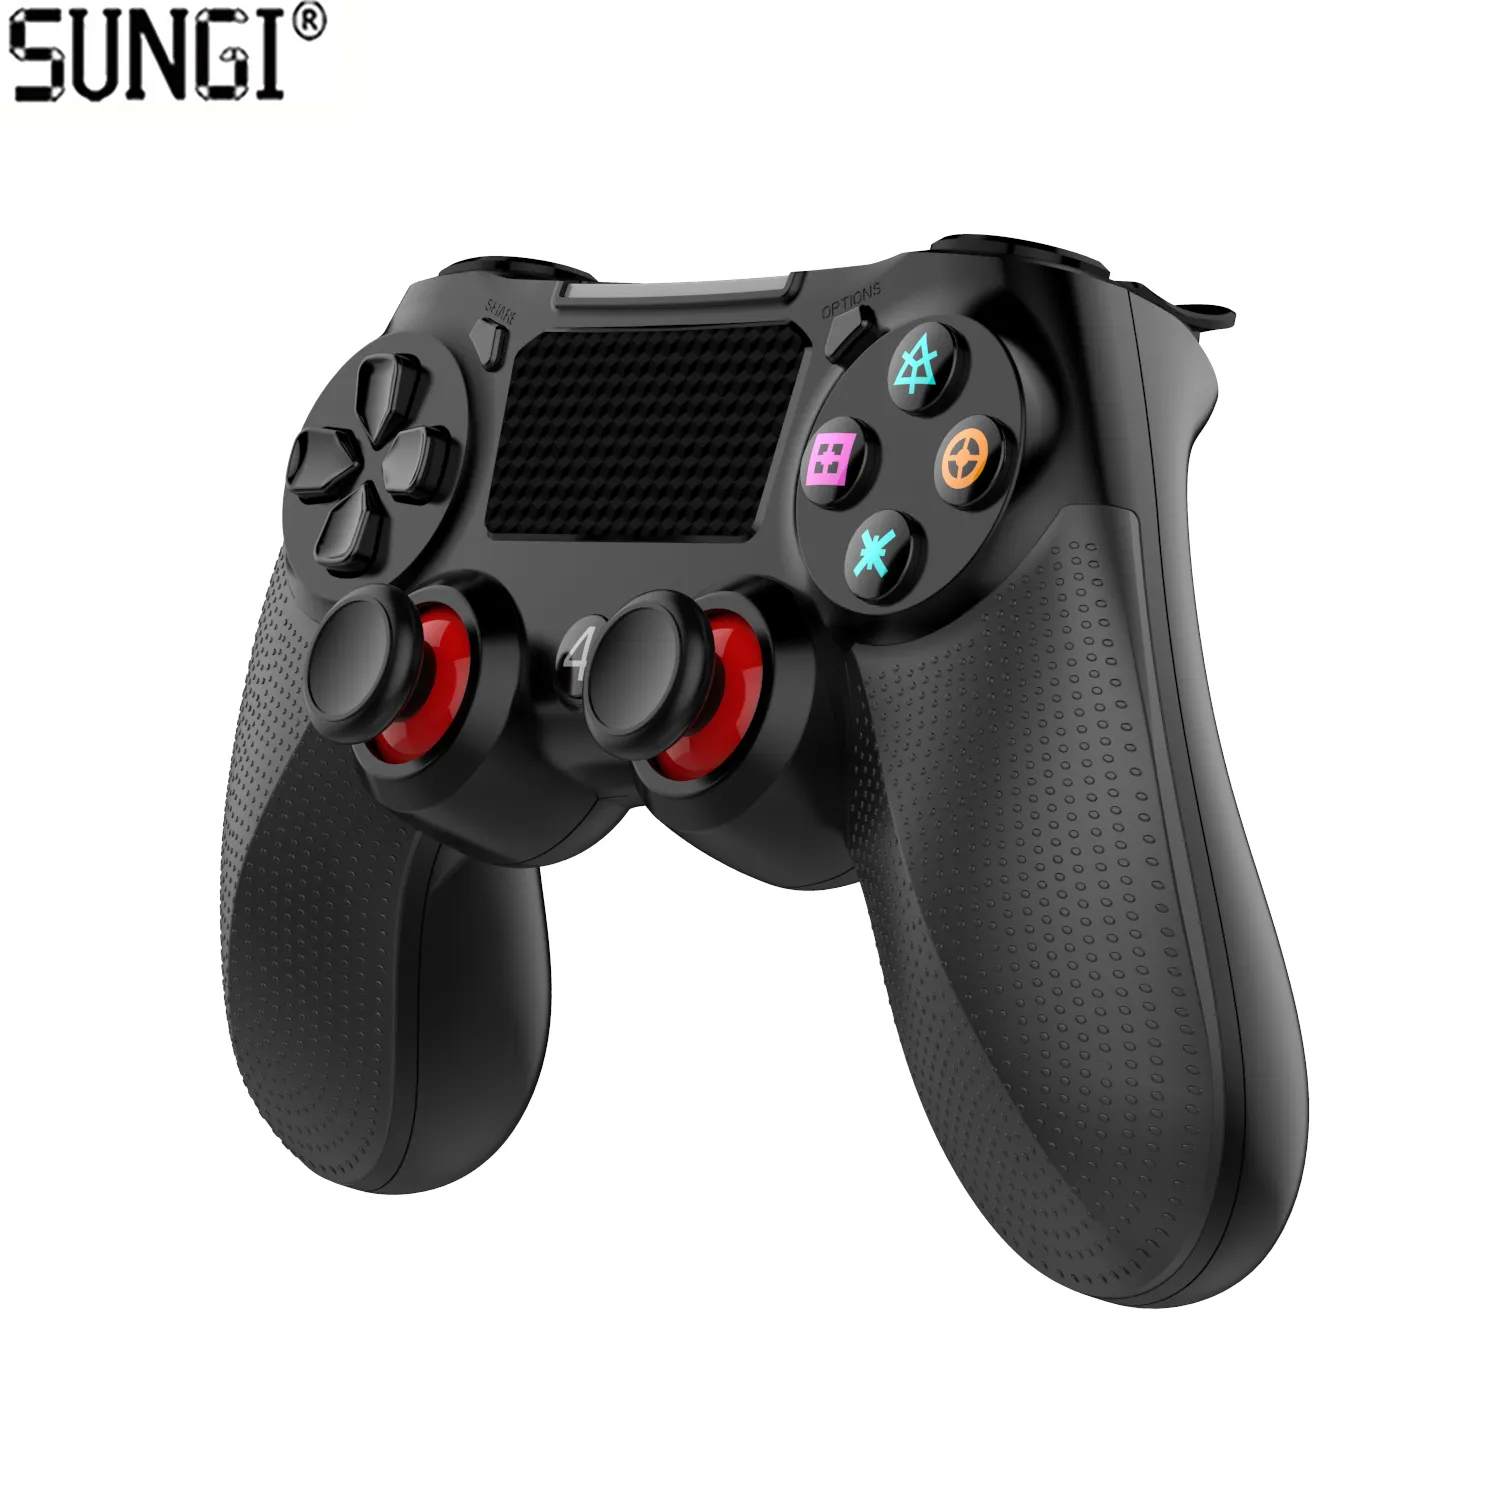 Wireless Gamepad Controller Ergonomic LED Indicator Remote Game Controller Compatible with PC Laptop Android PS4